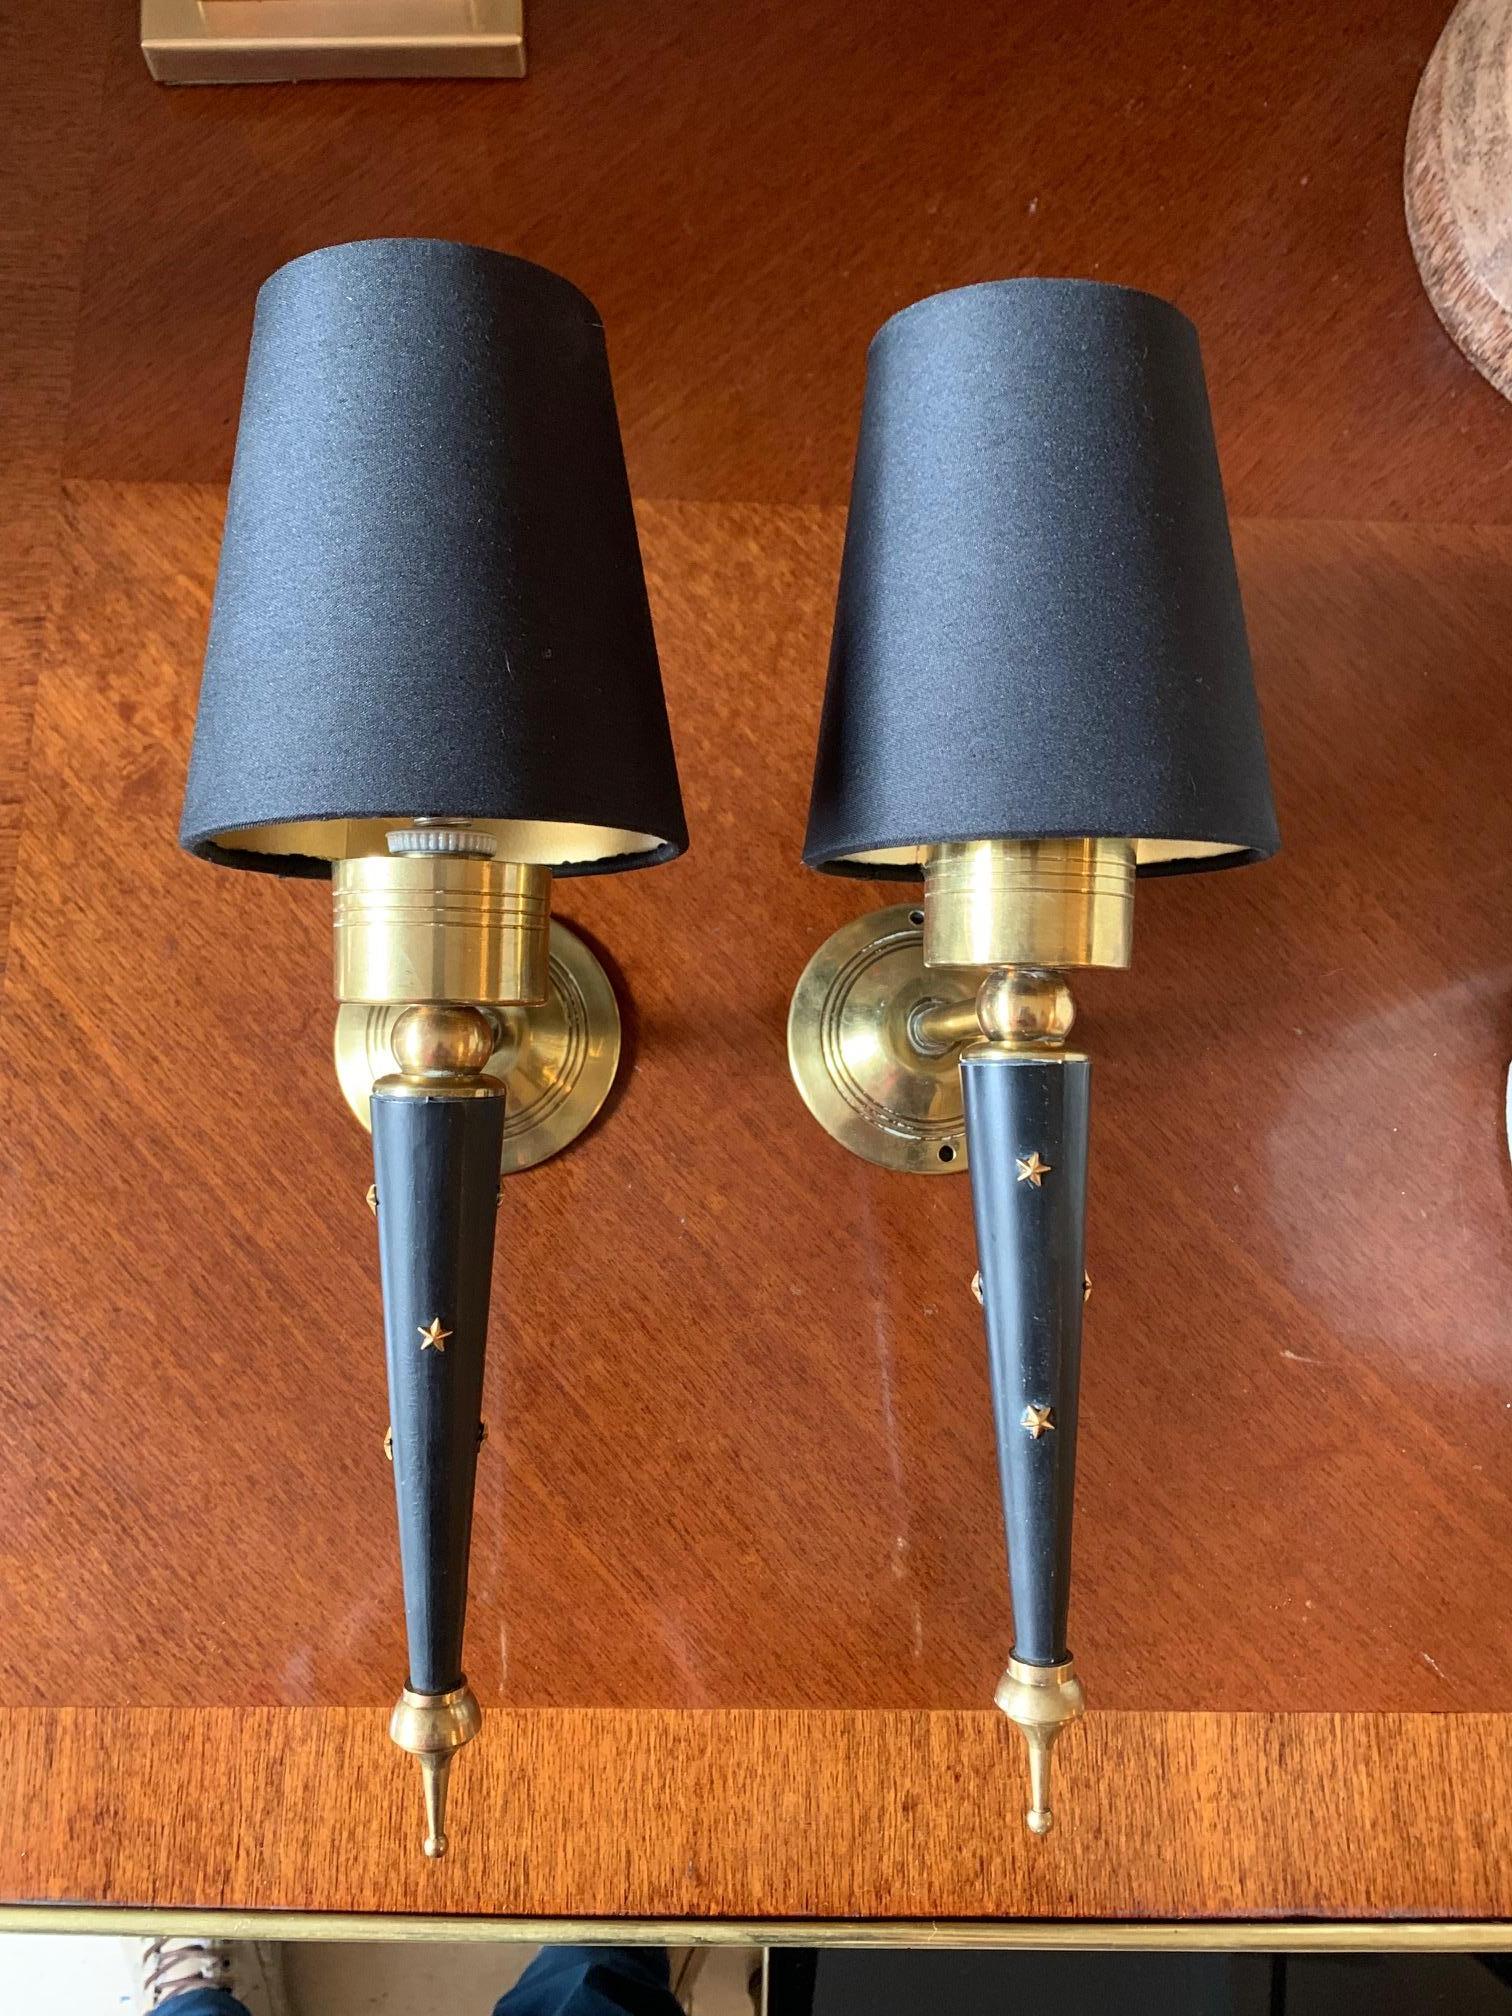 Pair of 1950s French midcentury wall sconces, in lacquered metal and golden brass, main part decorated with brass stars, the lampshade is black and gold interior
Electrical installation rewired.
 